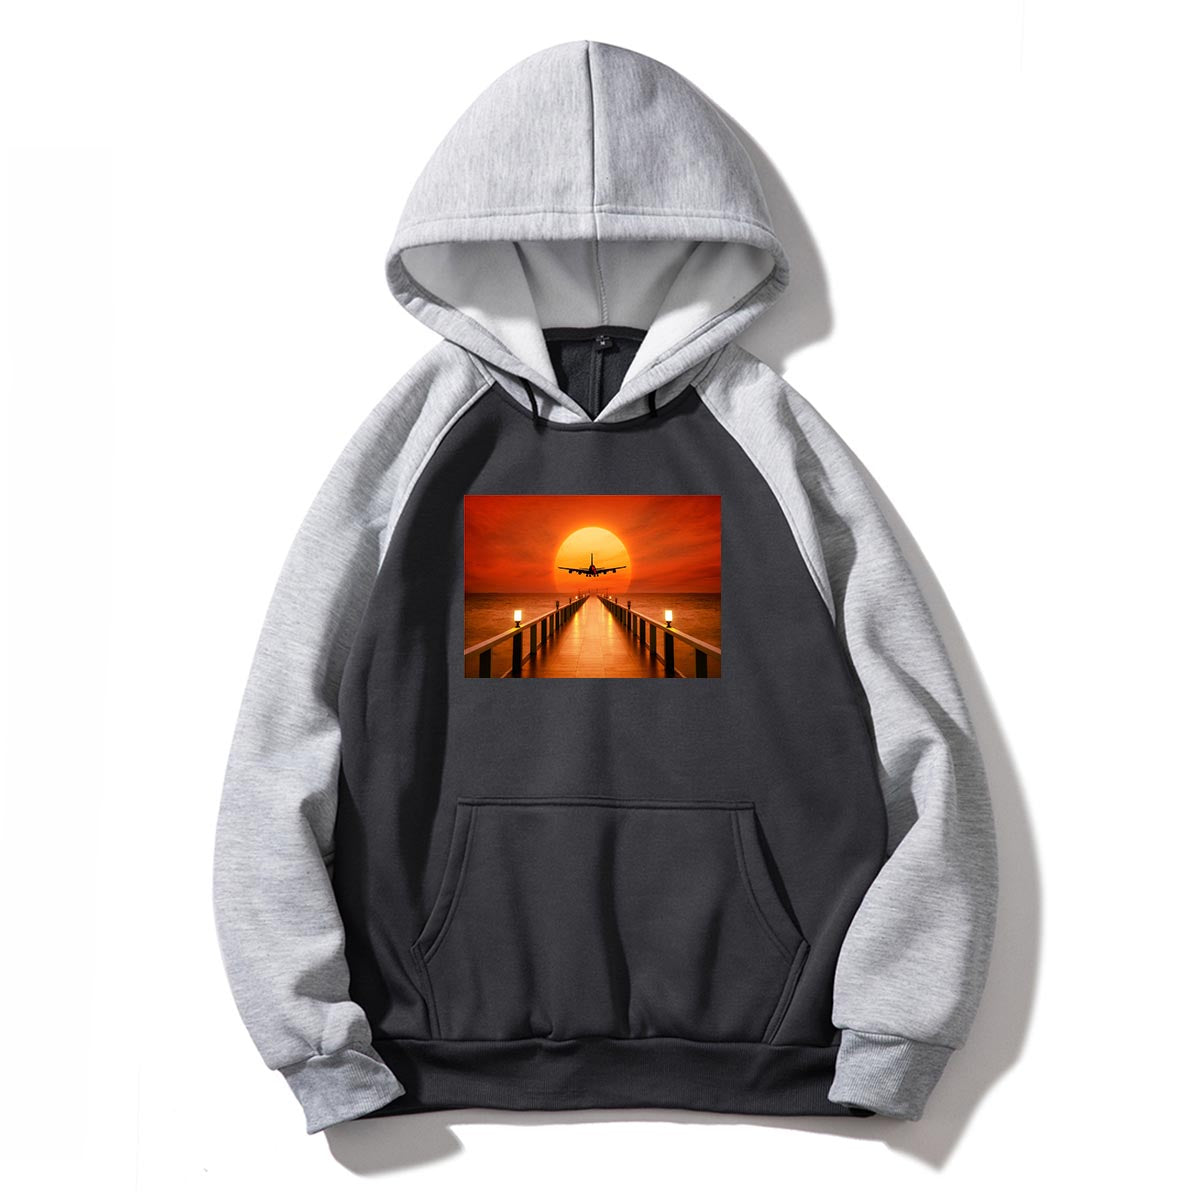 Airbus A380 Towards Sunset Designed Colourful Hoodies